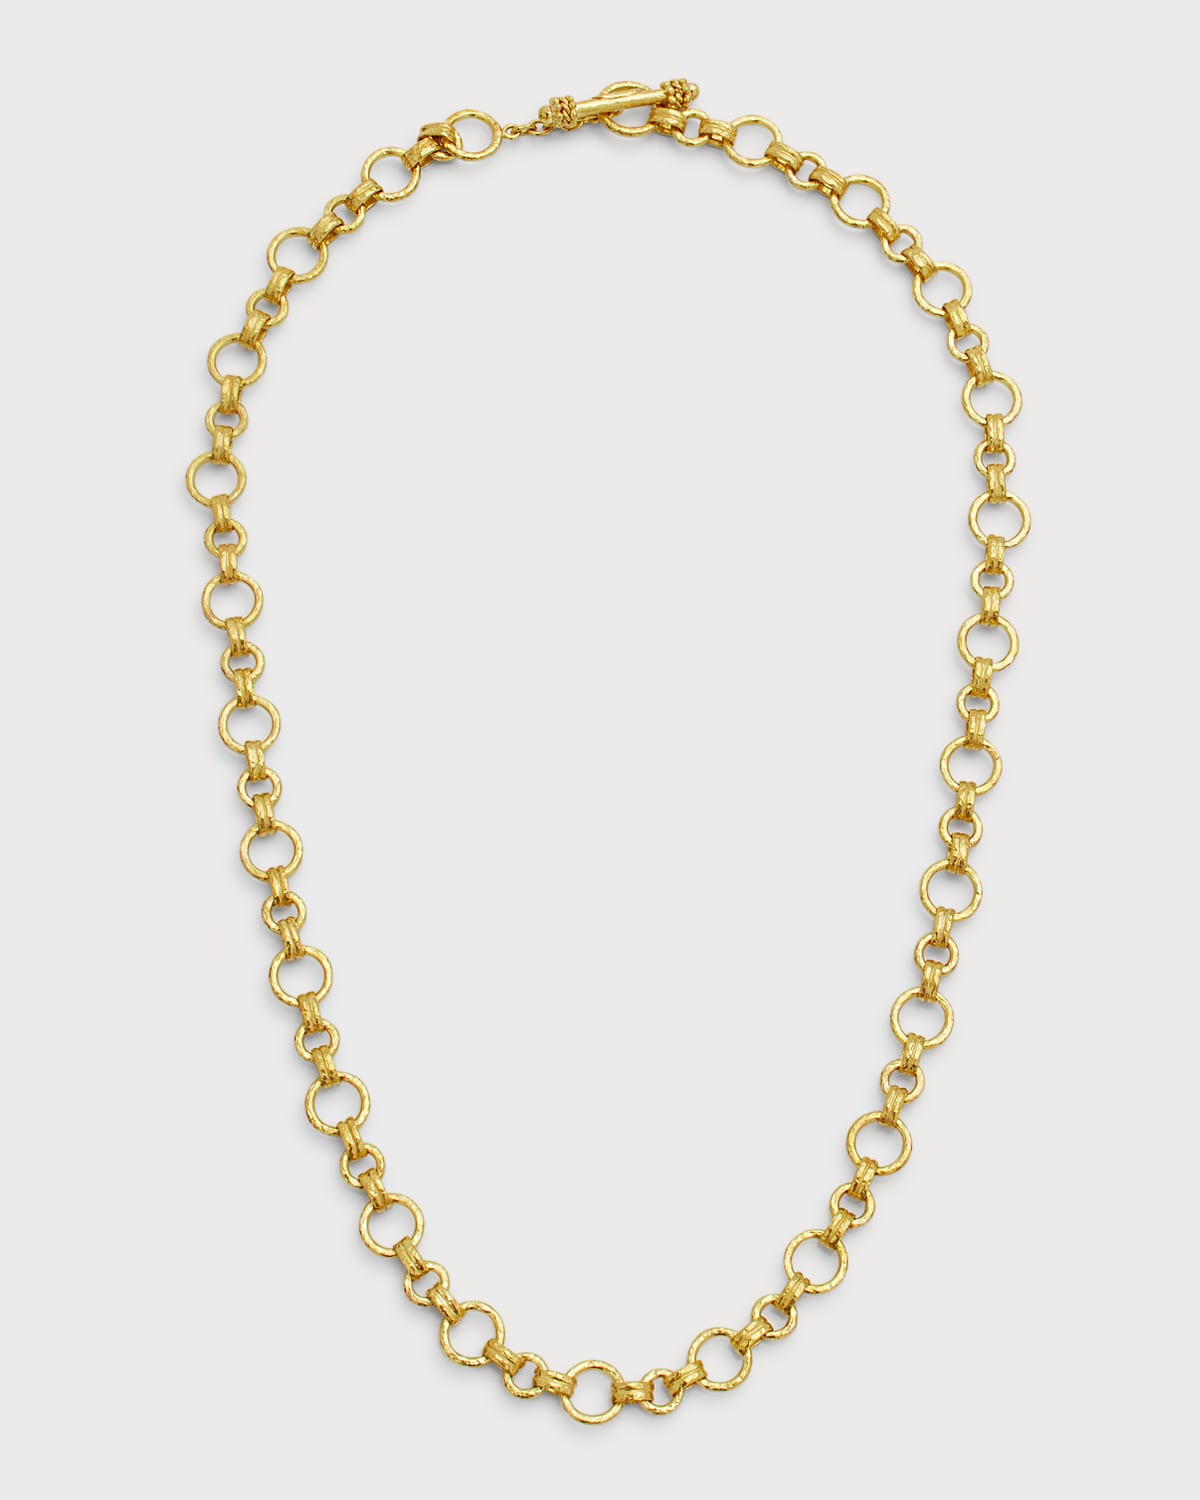 19K Yellow Gold 'Bellariva' Necklace with Toggle, 21"L